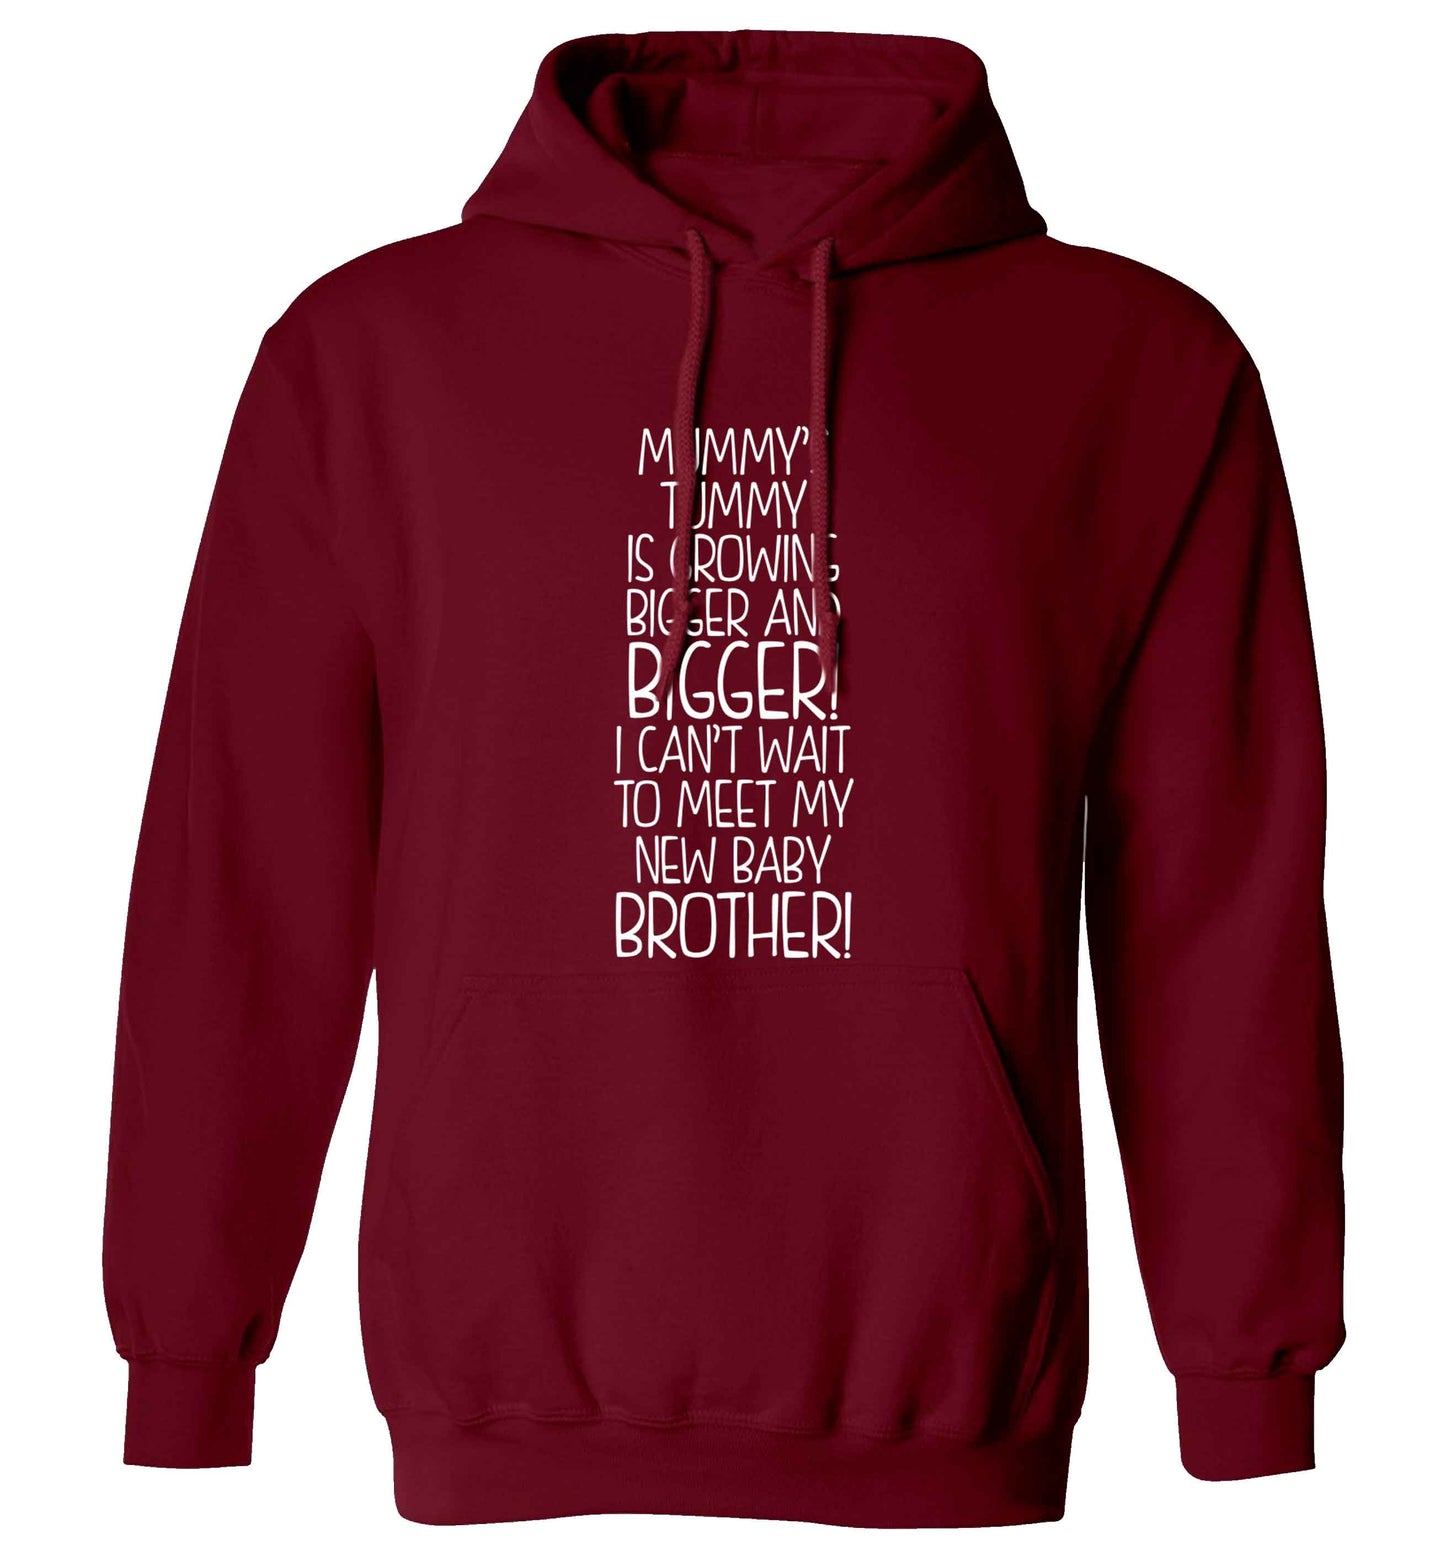 Mummy's tummy is growing bigger and bigger I can't wait to meet my new baby brother! adults unisex maroon hoodie 2XL